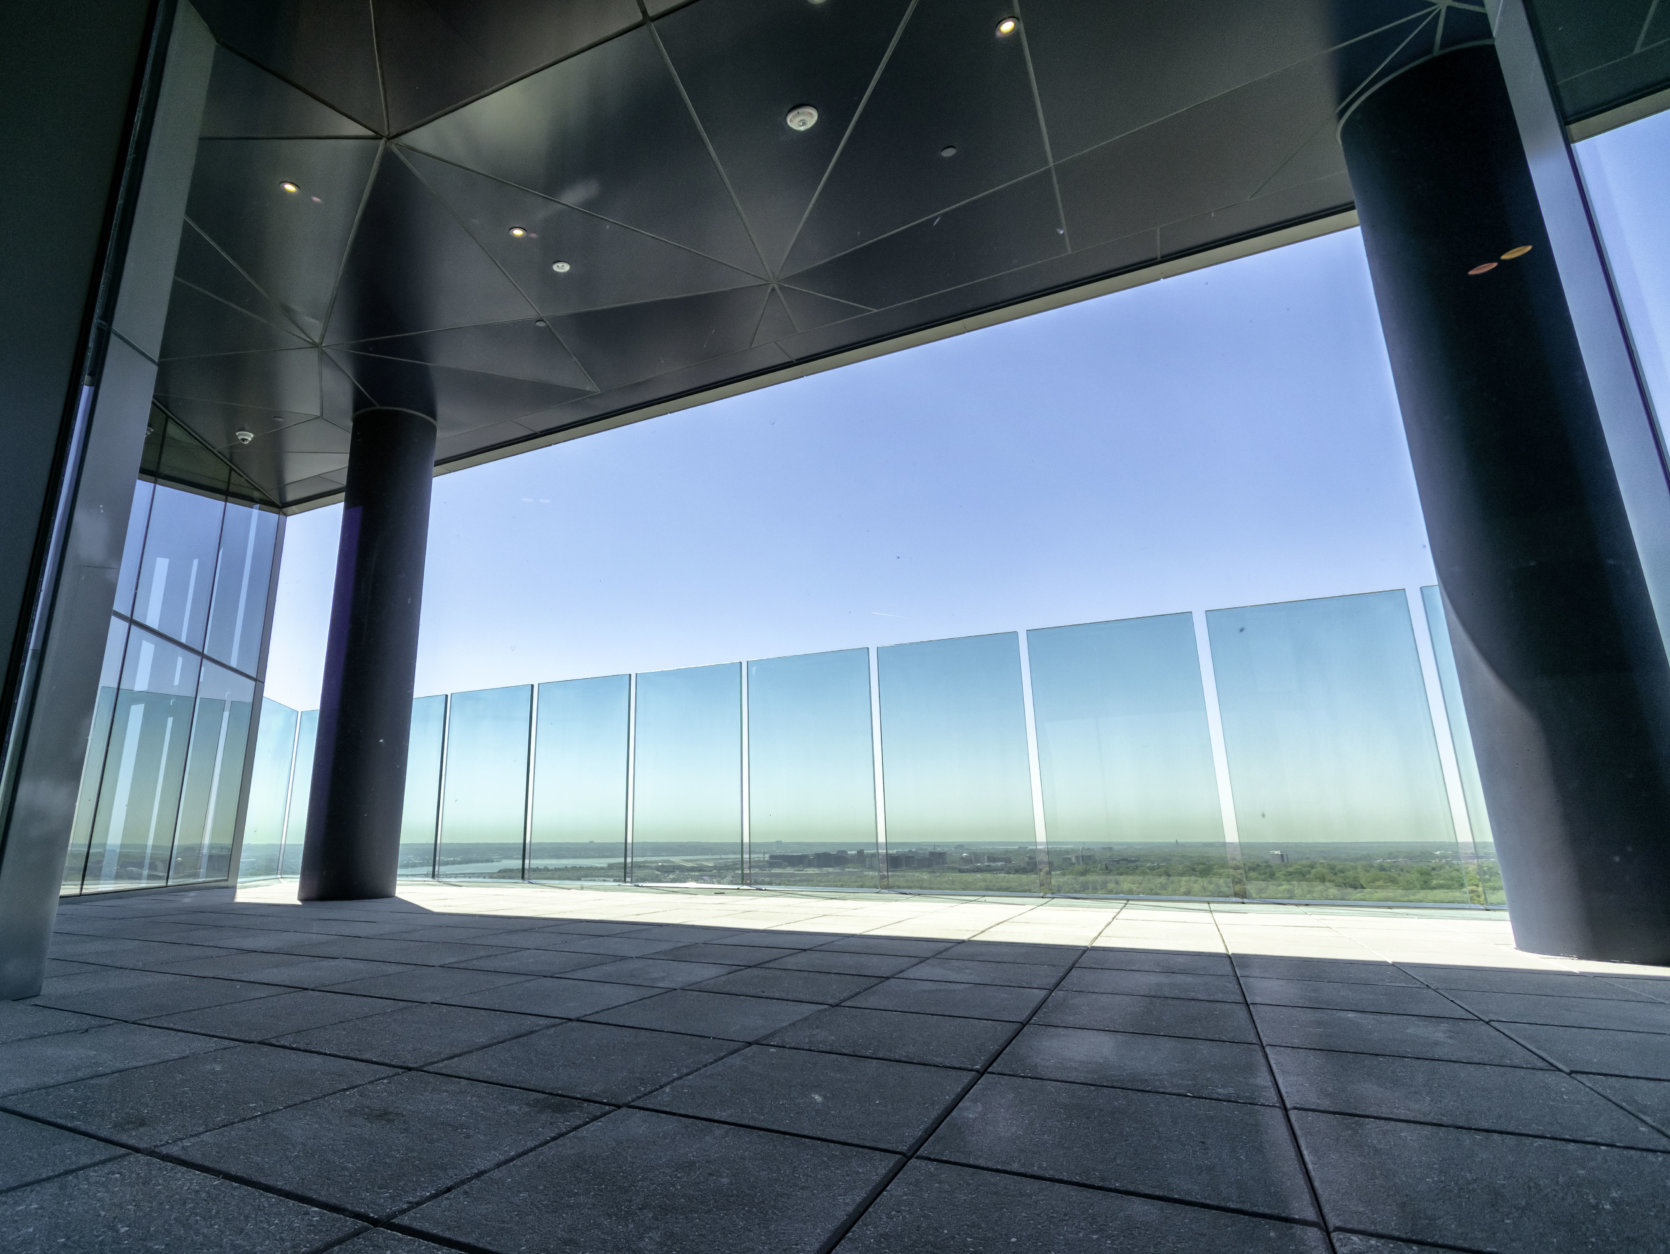 The Observation Deck At CEB Tower, developer JBG’s newest office building in Rosslyn, will officially open its observation deck June 21, a fitting day for long-distance viewing: the Summer Solstice and longest day of the year. (Courtesy JBG Smith)